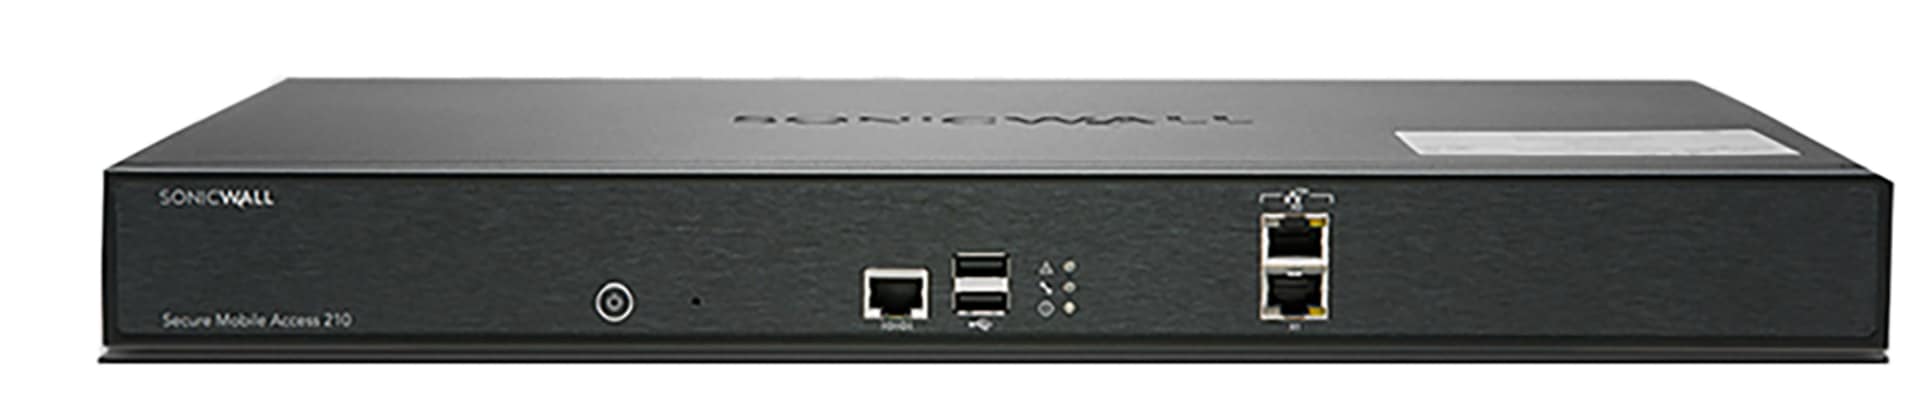 SonicWall Secure Mobile Access 210 - security appliance - with 1 year 24x7